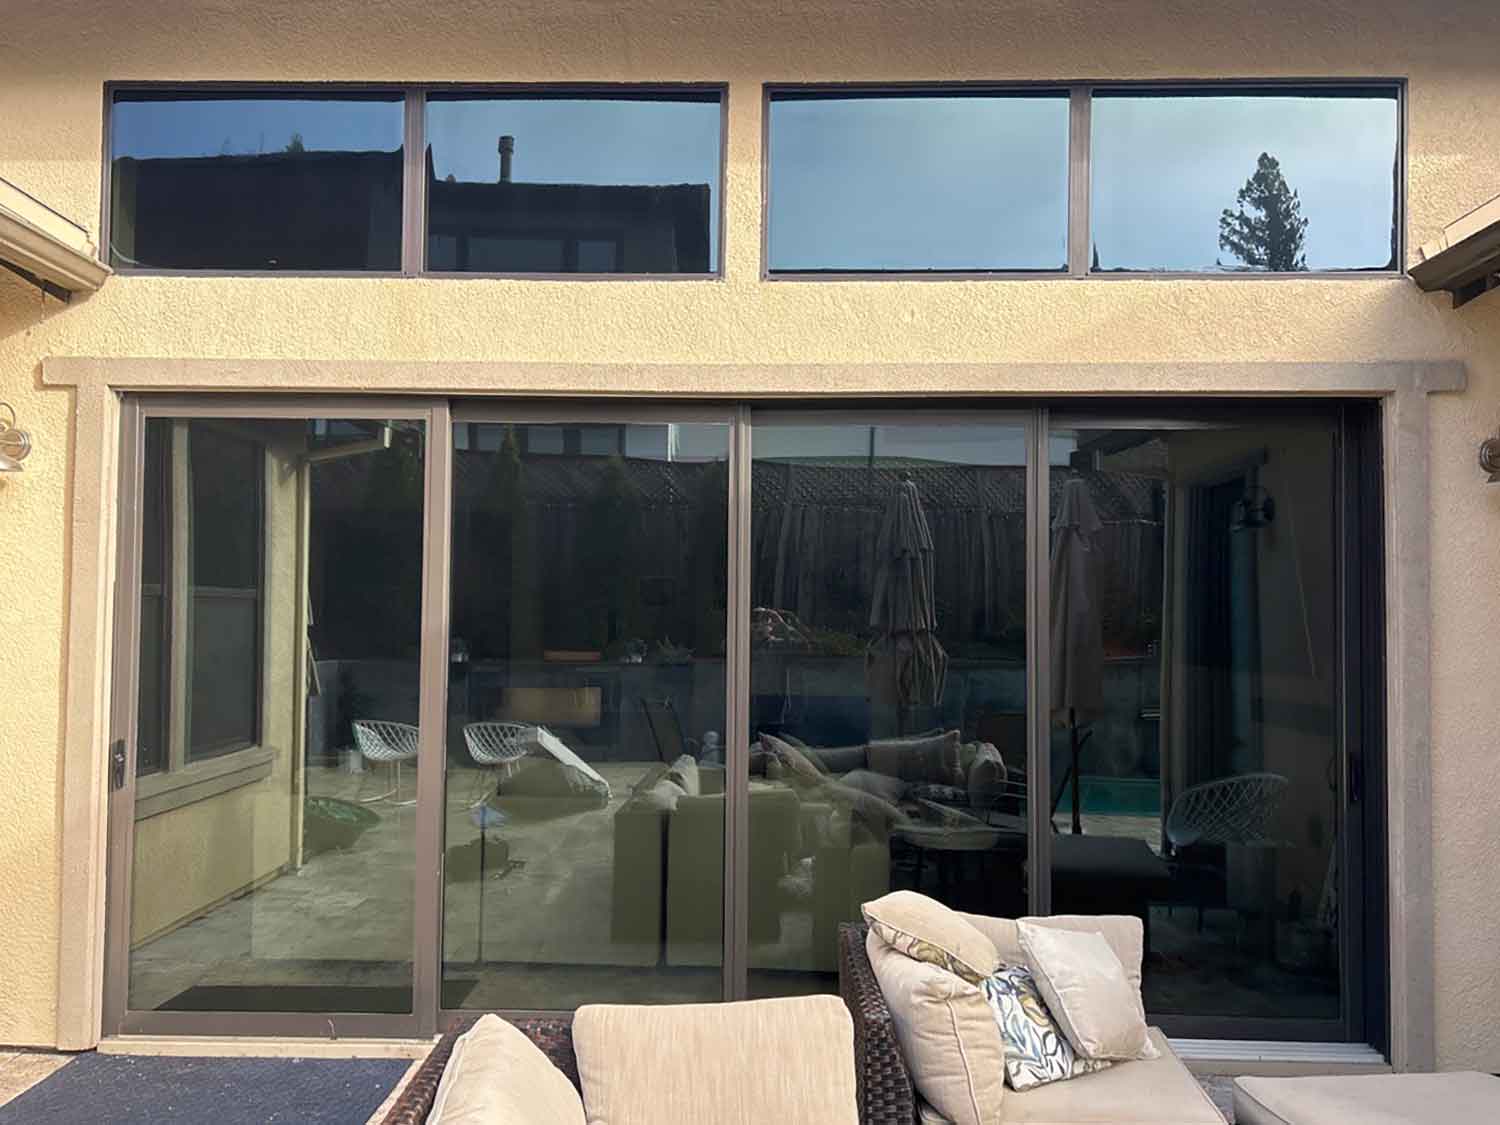 3M Exterior Window Film for Petaluma, CA Homes. Installed by ClimatePro. Get a free estimate today!